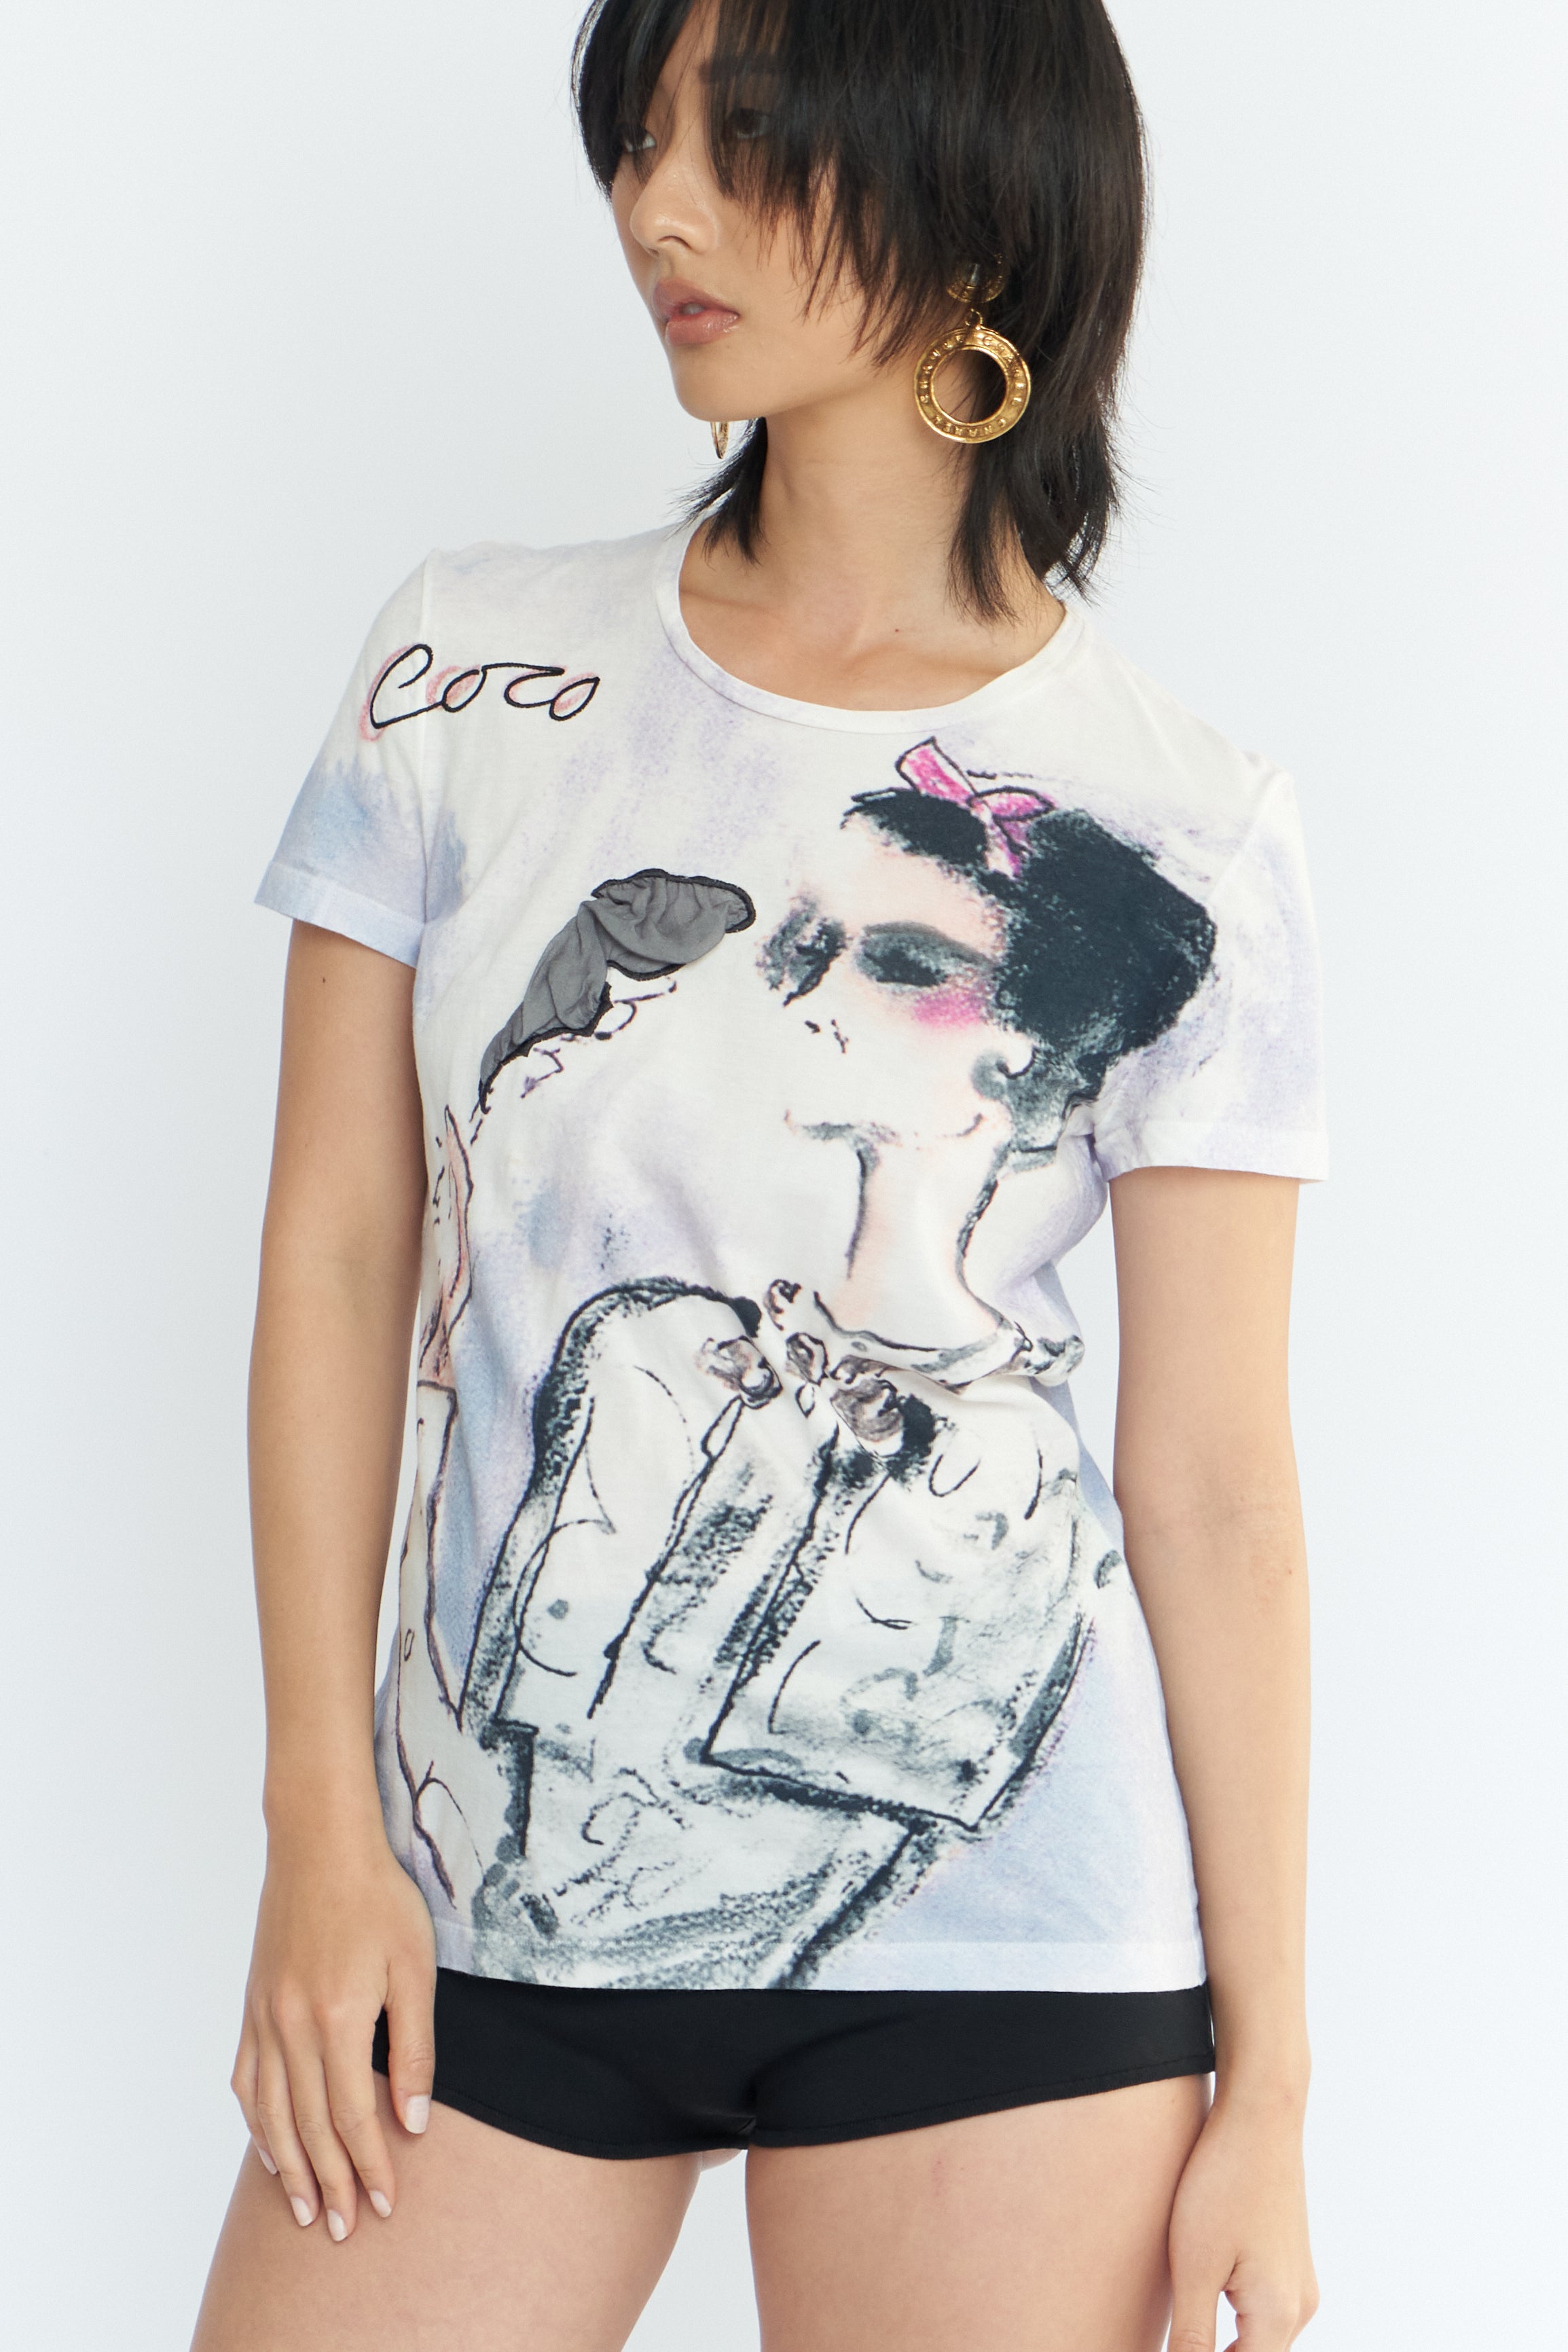 Chanel <br> S/S 2010 Coco Smoking t-shirt